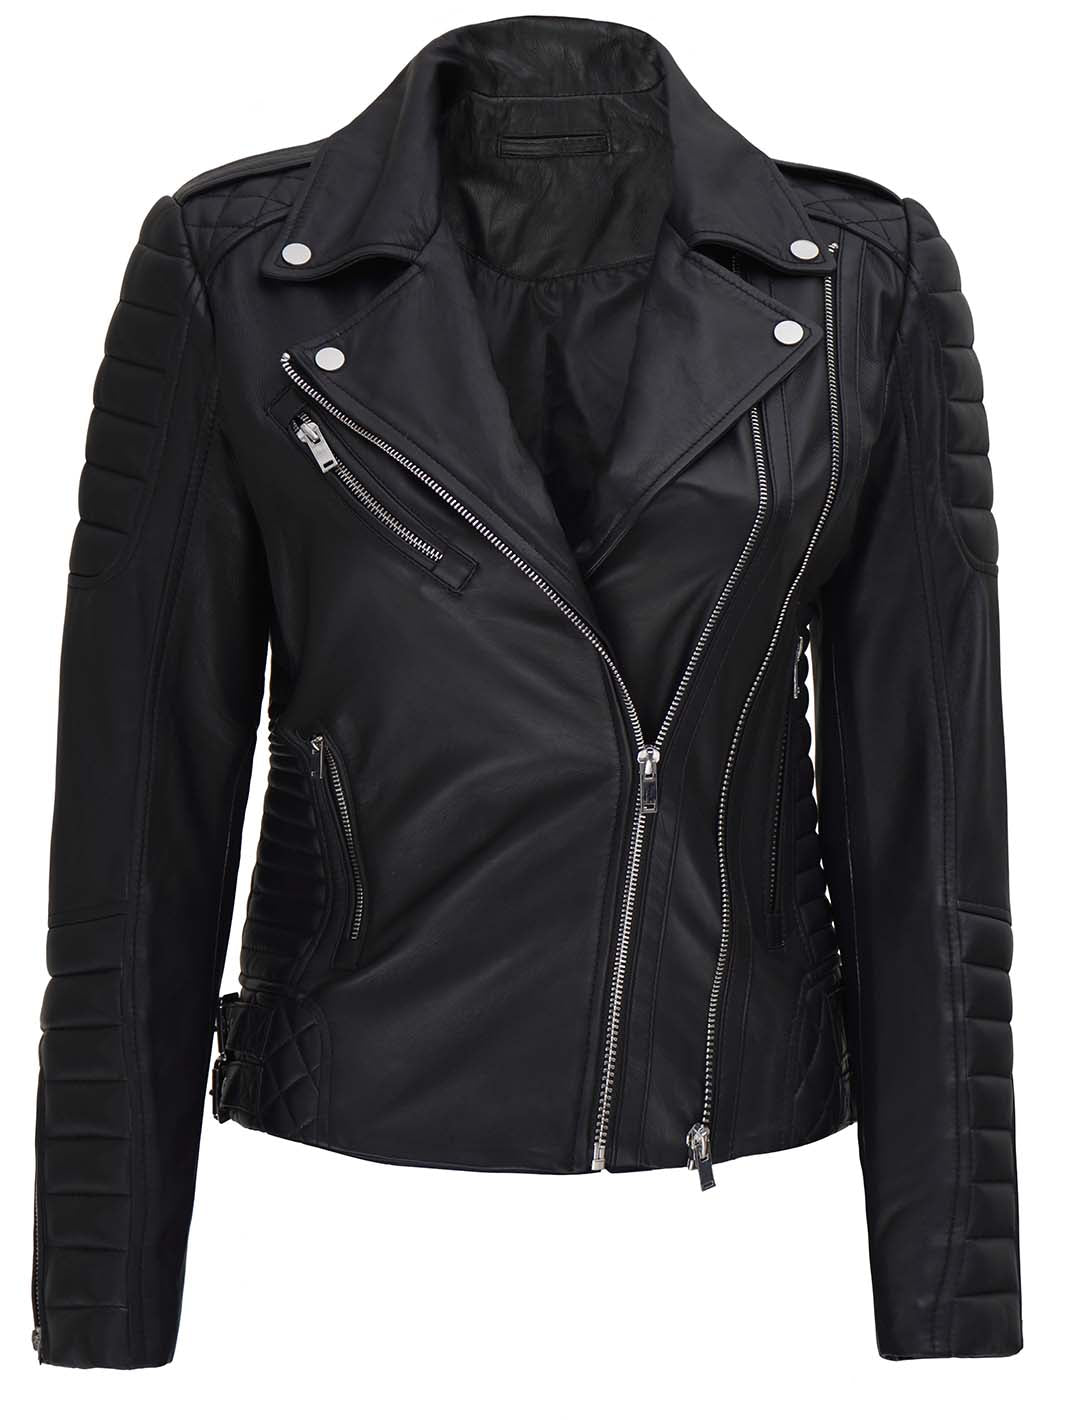 Womens Quilted Black Leather Motorcycle Jacket